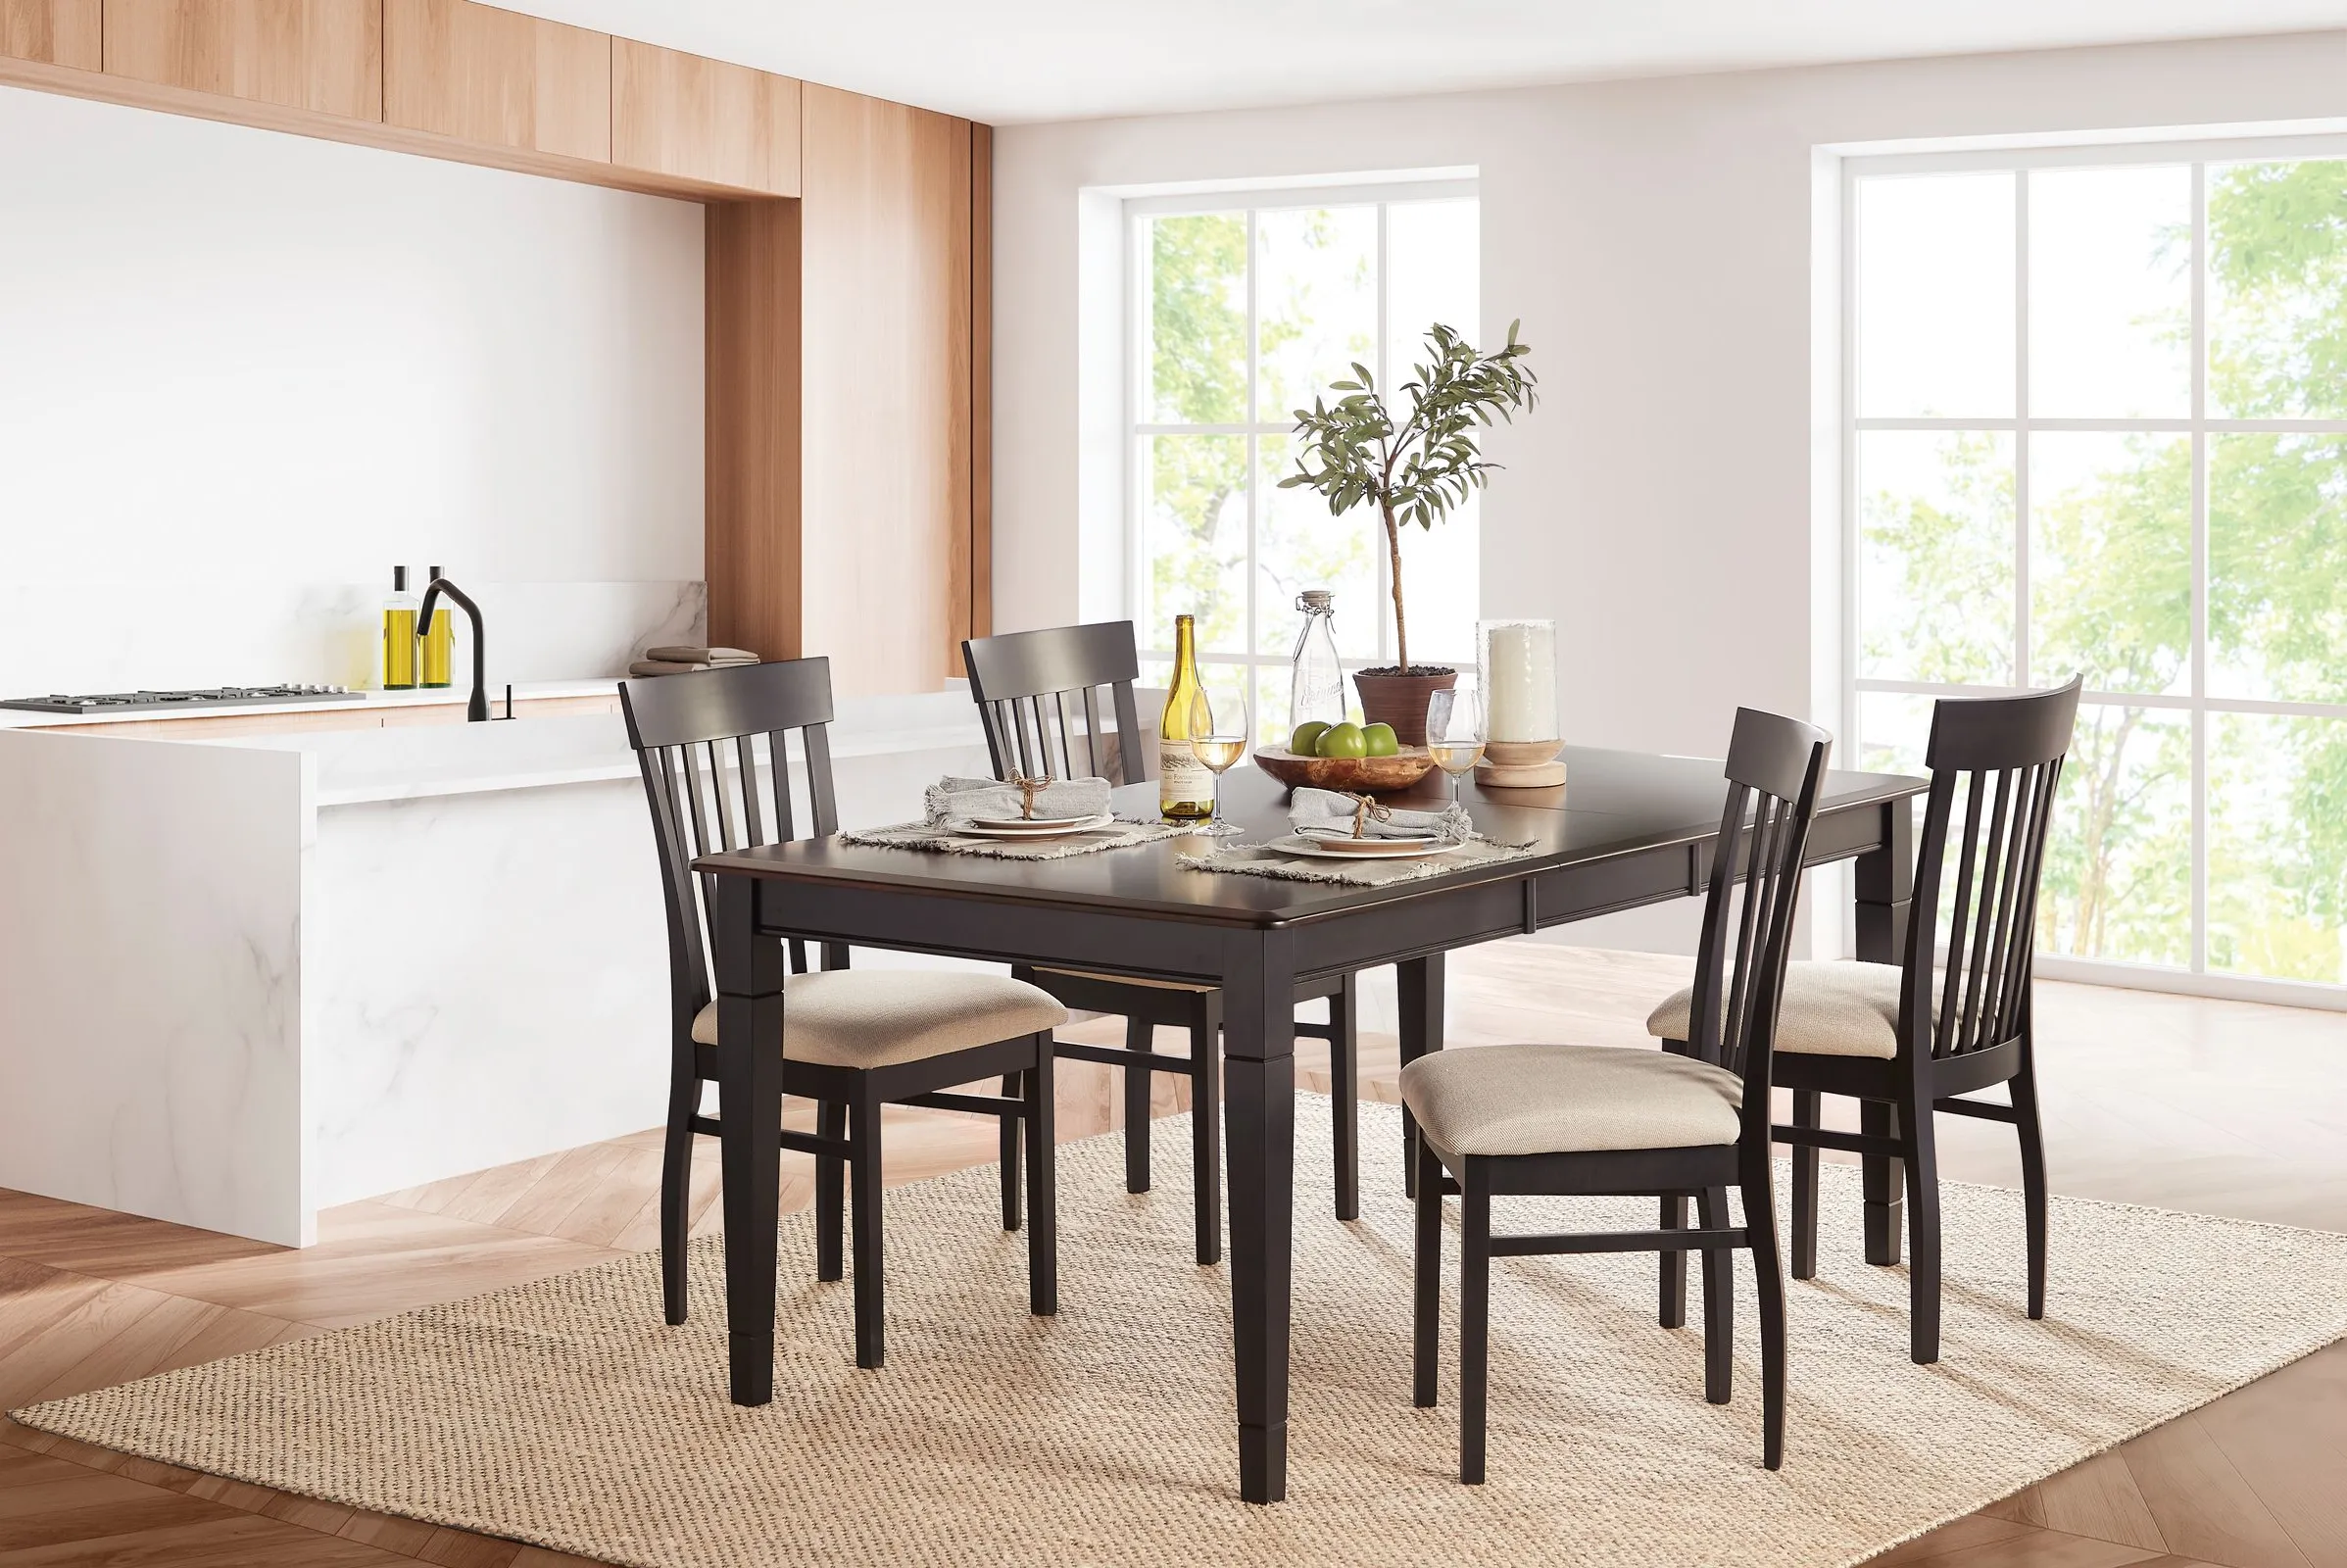 Anni Solid Maple Table with Auburn Finish + 4 Upholstered Chairs by Gascho